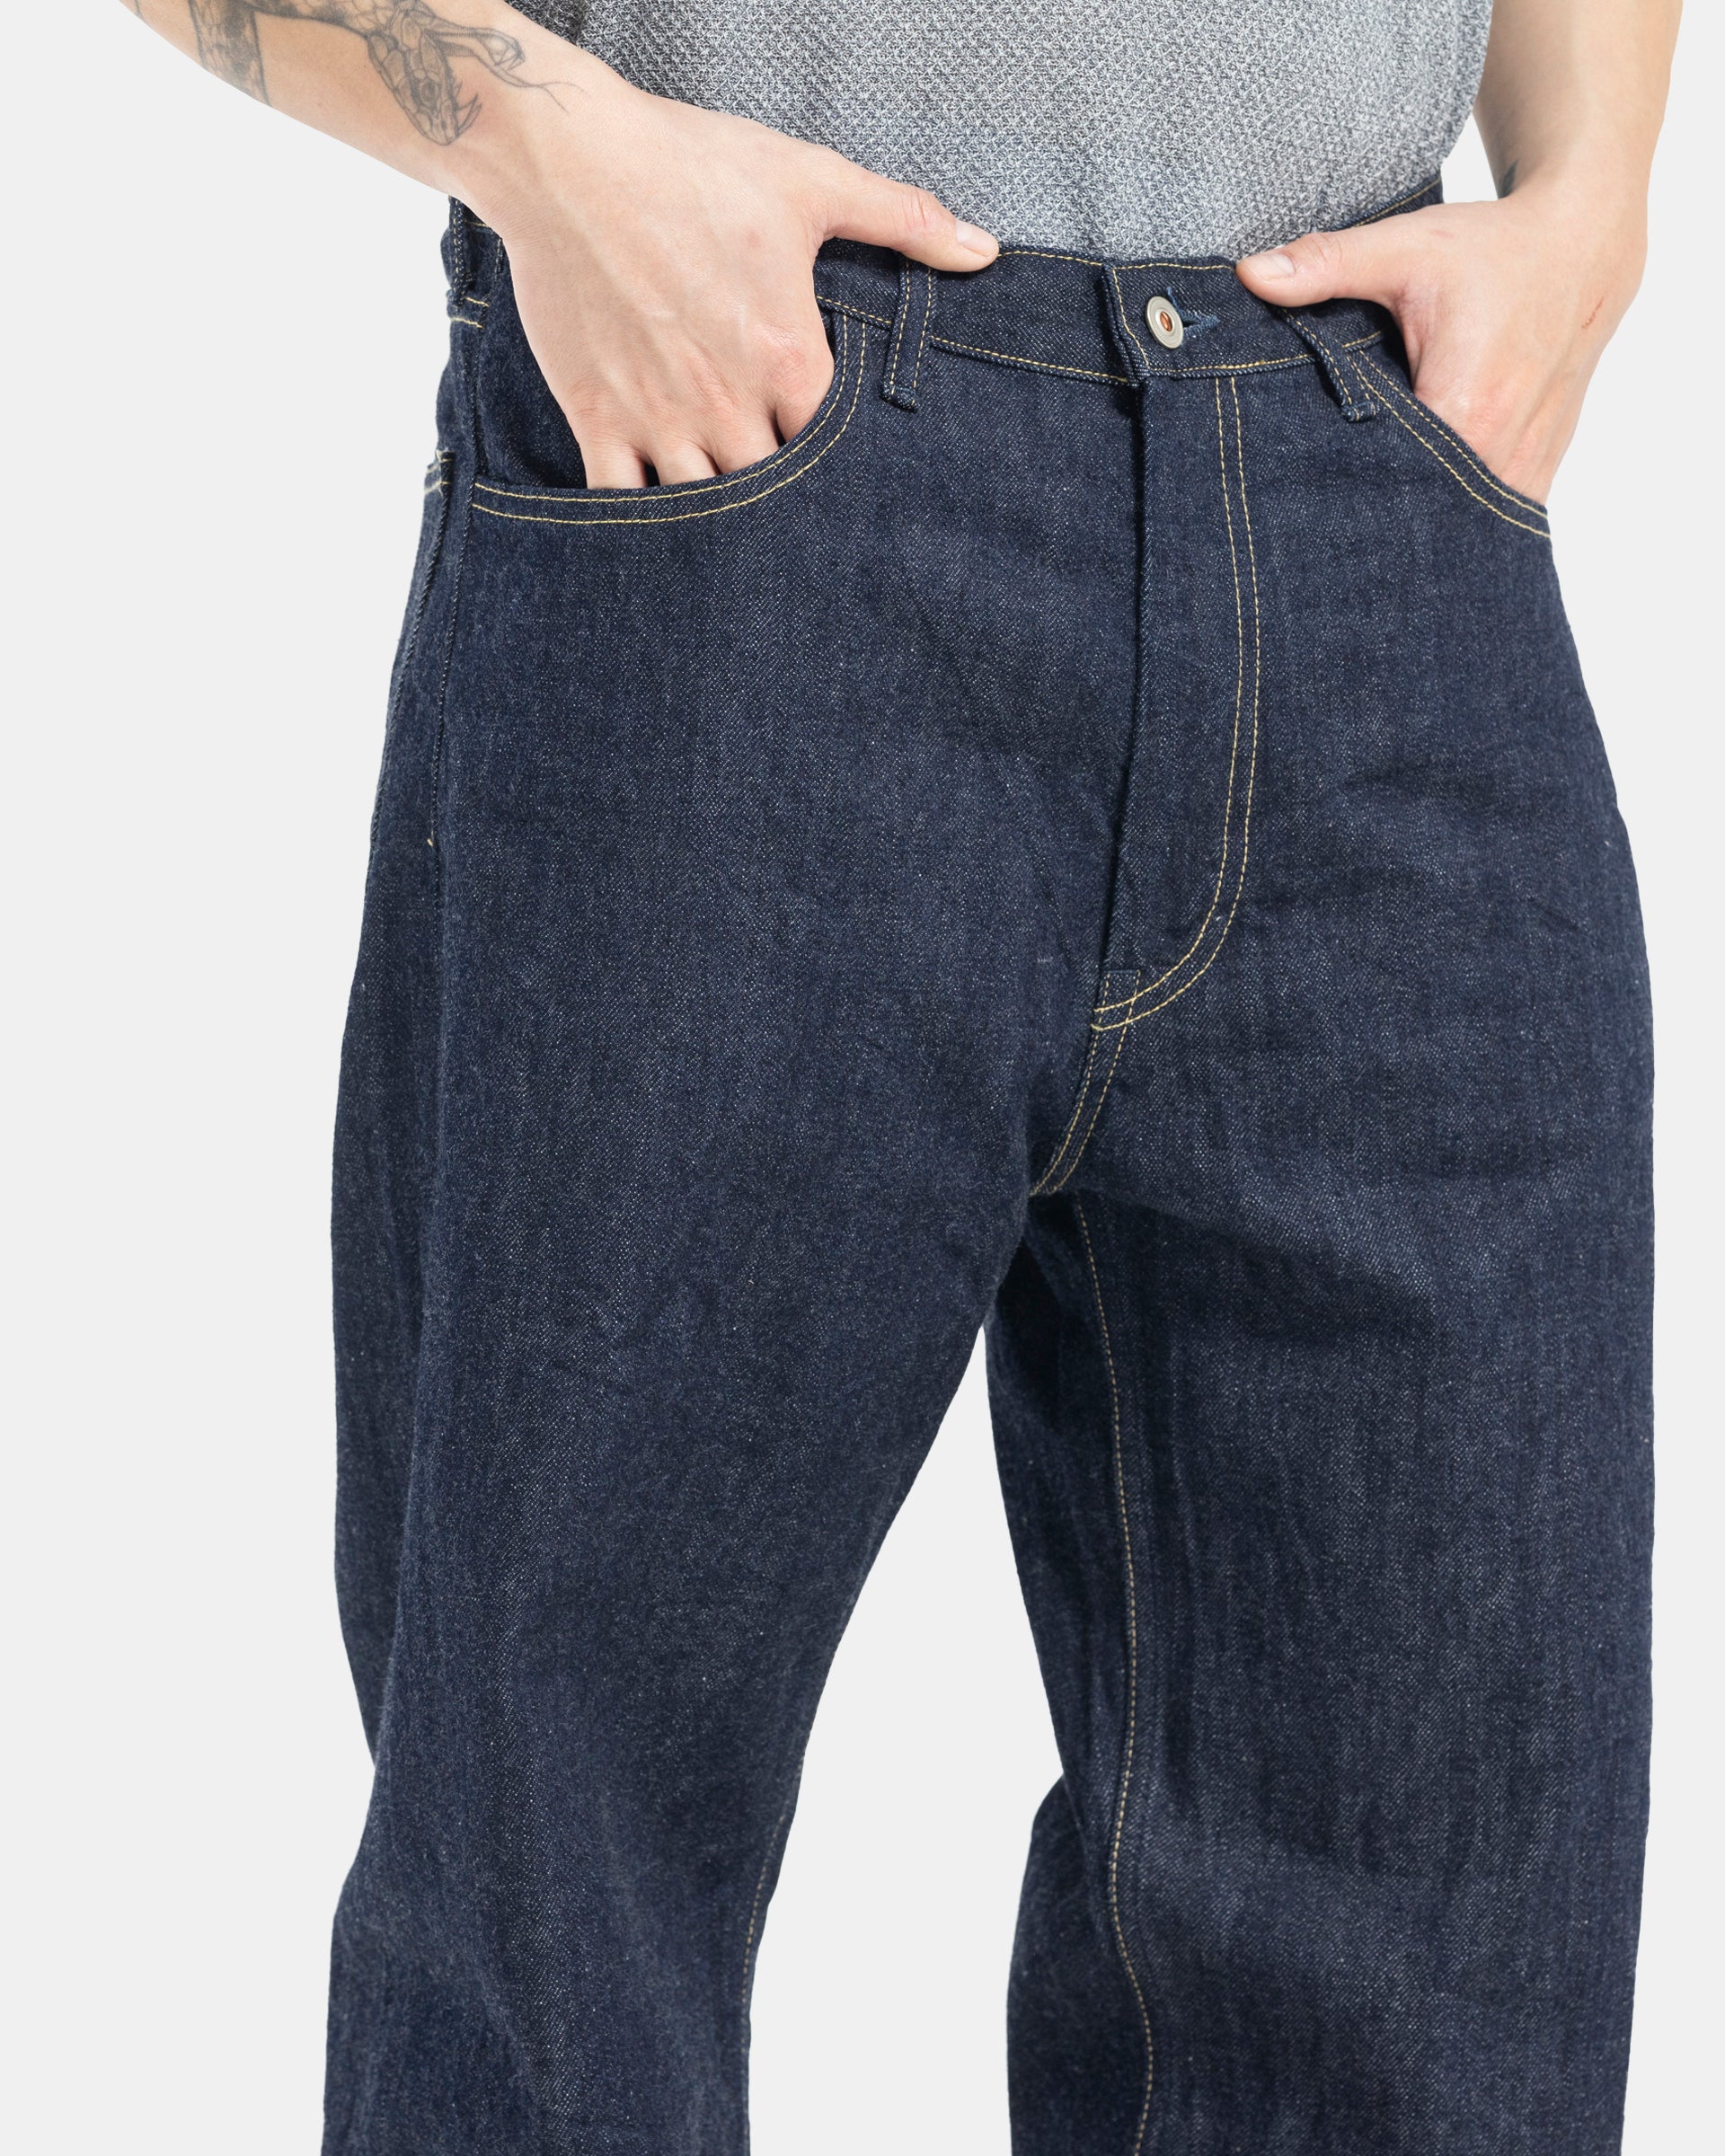 Male model wearing indigo Still By Hand selvedge jeans on white background